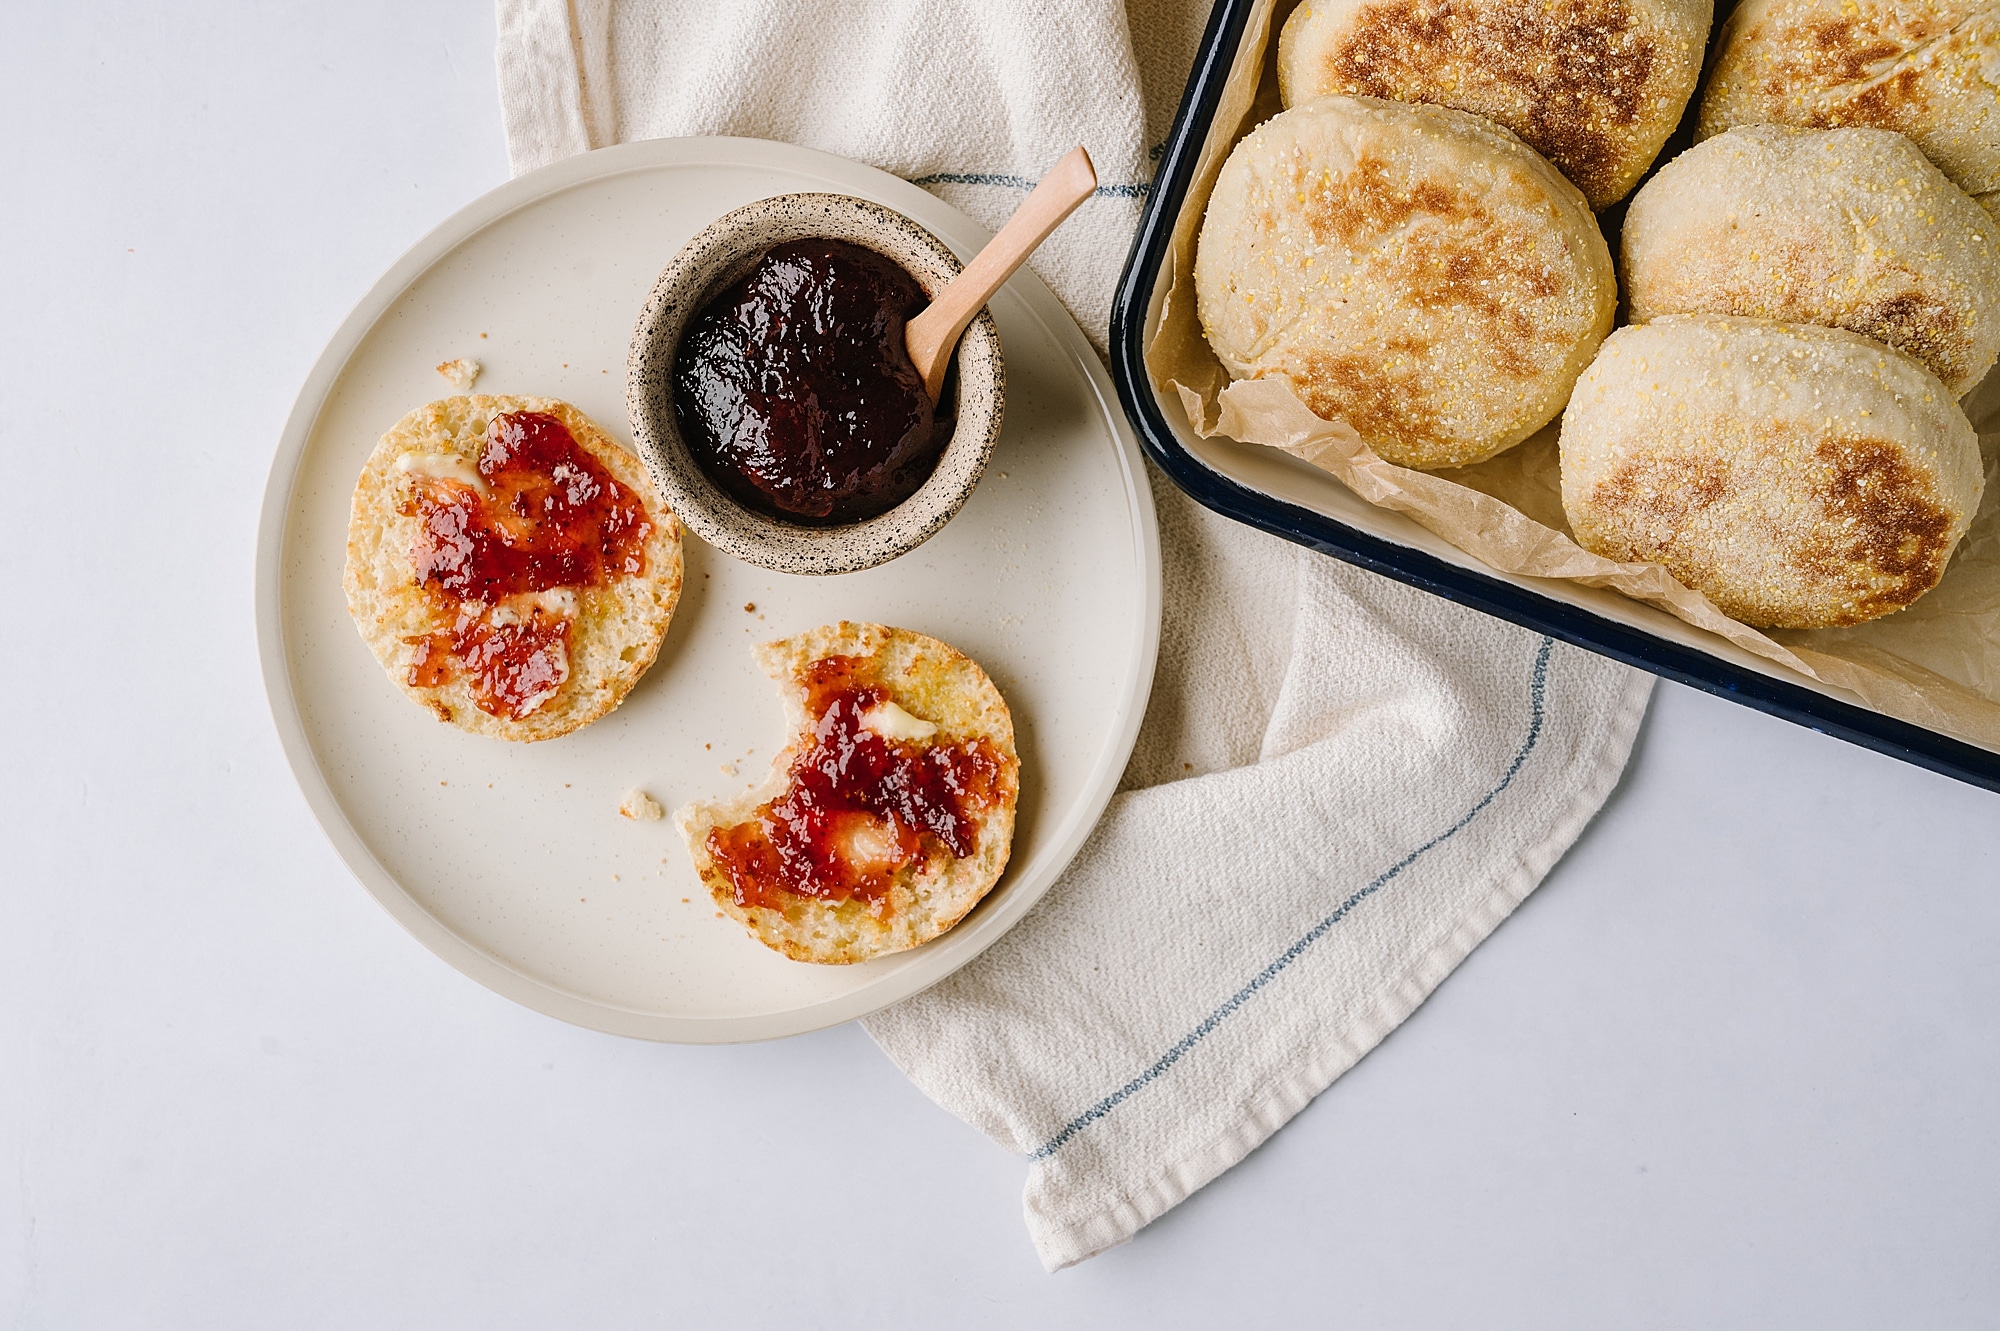 huckleberry english muffins on a plate with jam and dish of muffins in the background